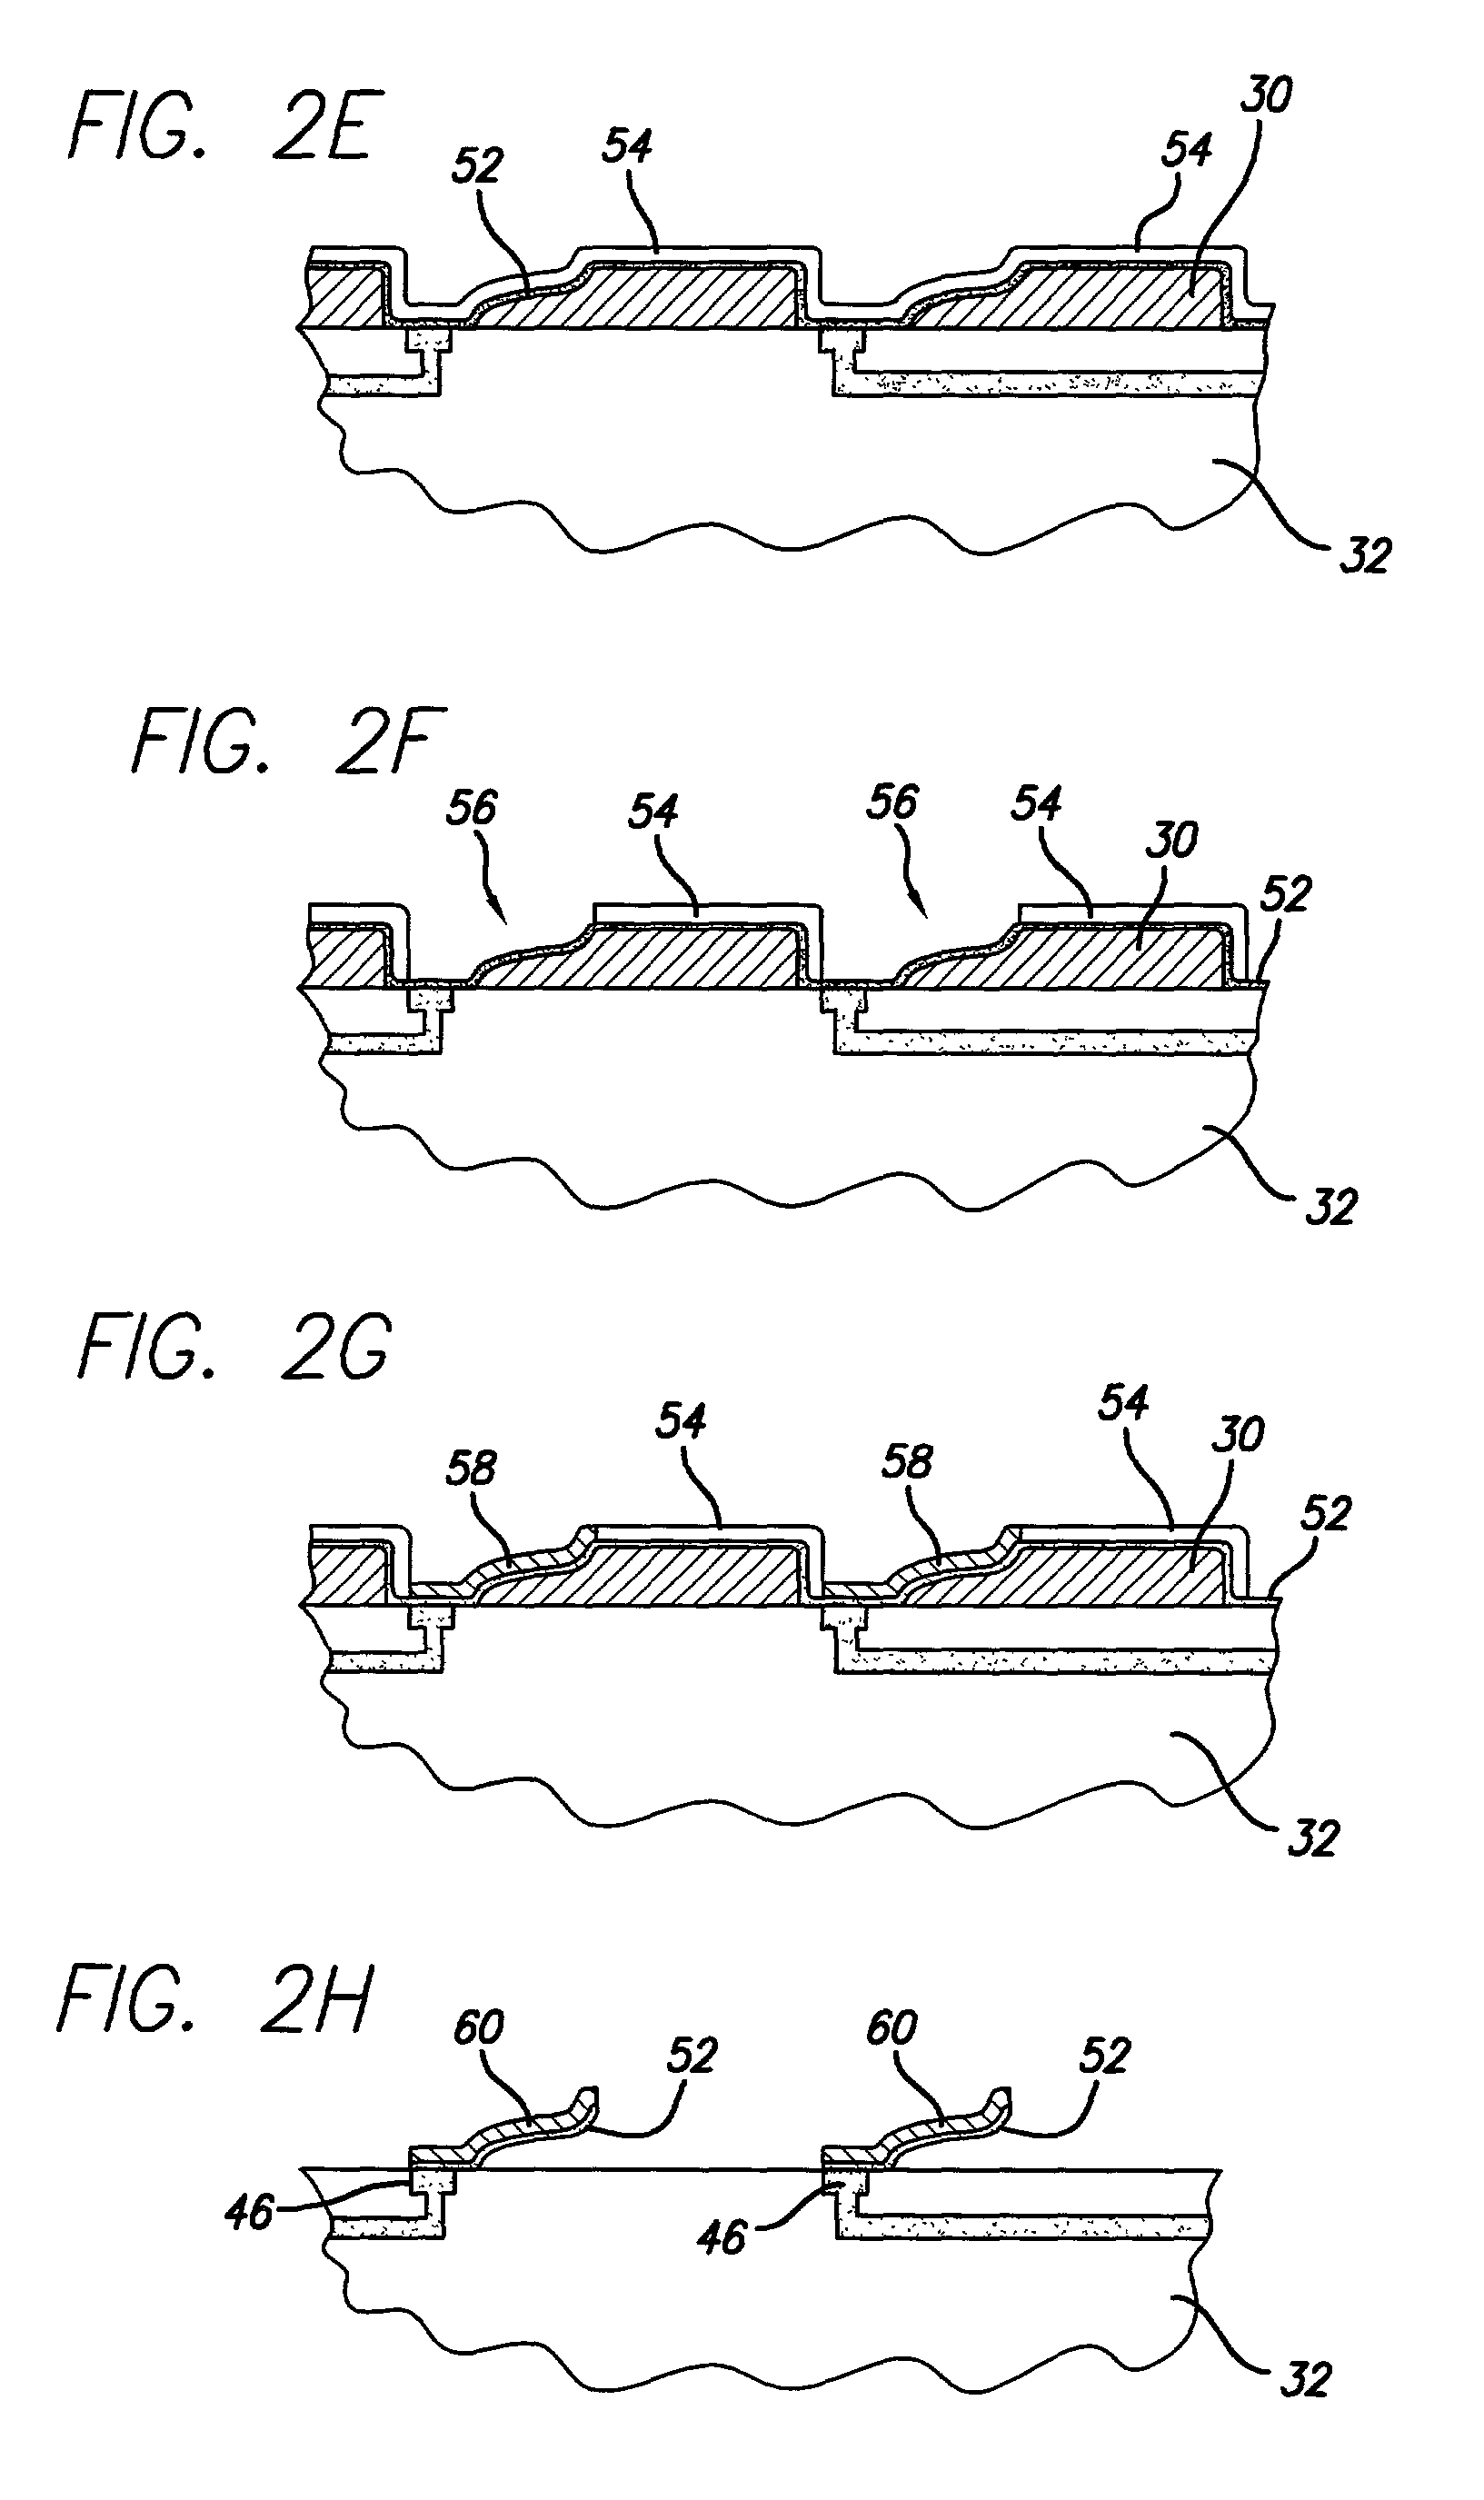 Method for forming microelectronic spring structures on a substrate